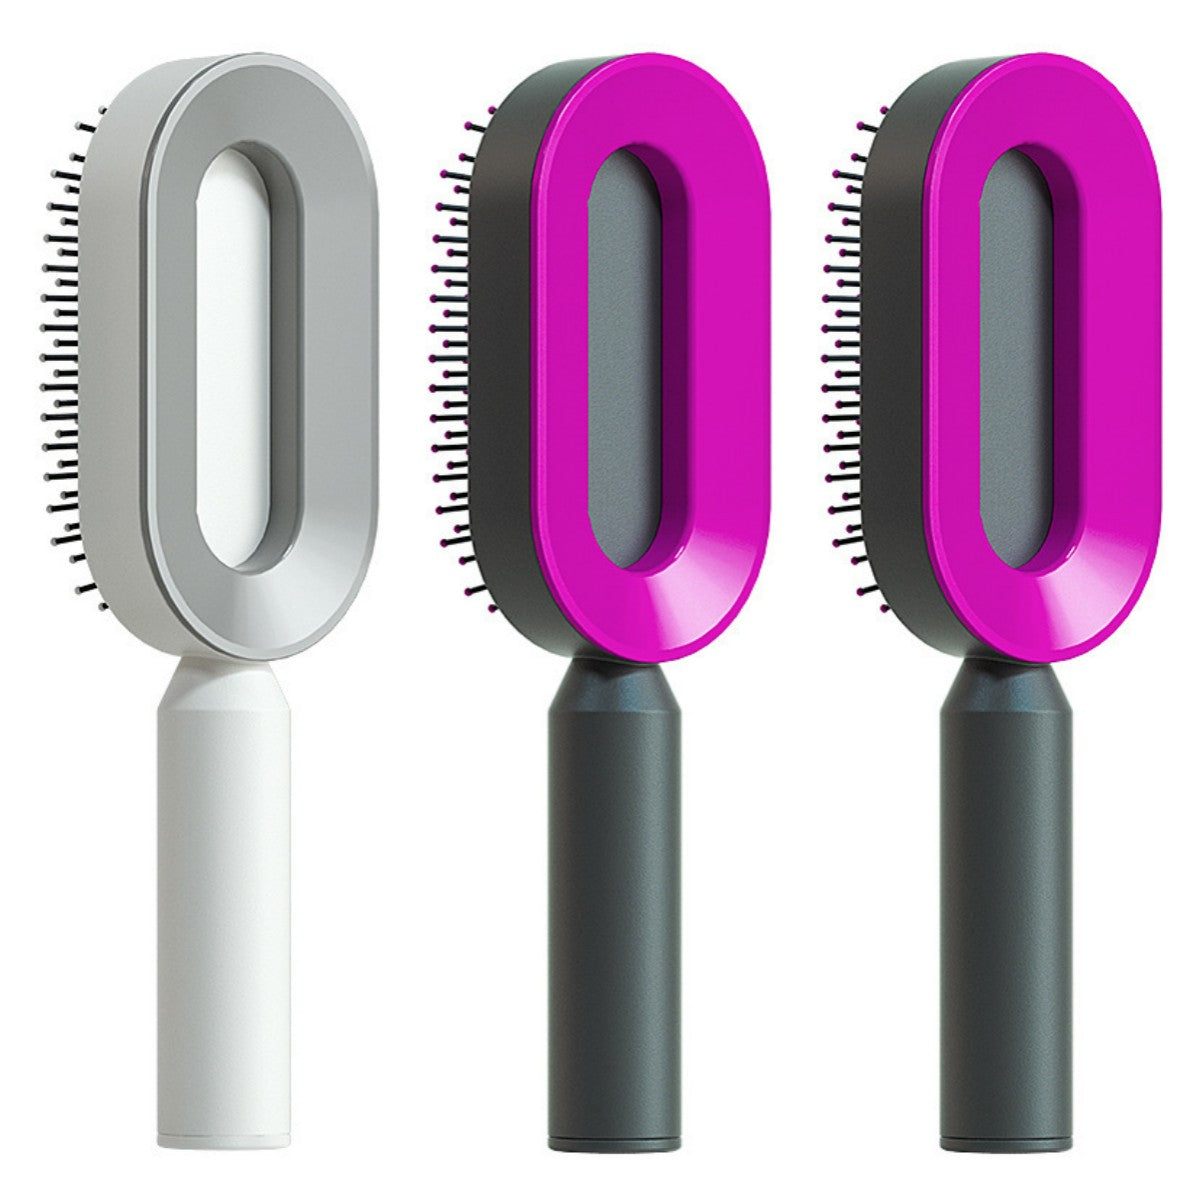 Self Cleaning Hair Brush For Women One-key Cleaning Hair Loss Airbag Massage Scalp Comb Anti-Static Hairbrush Set X